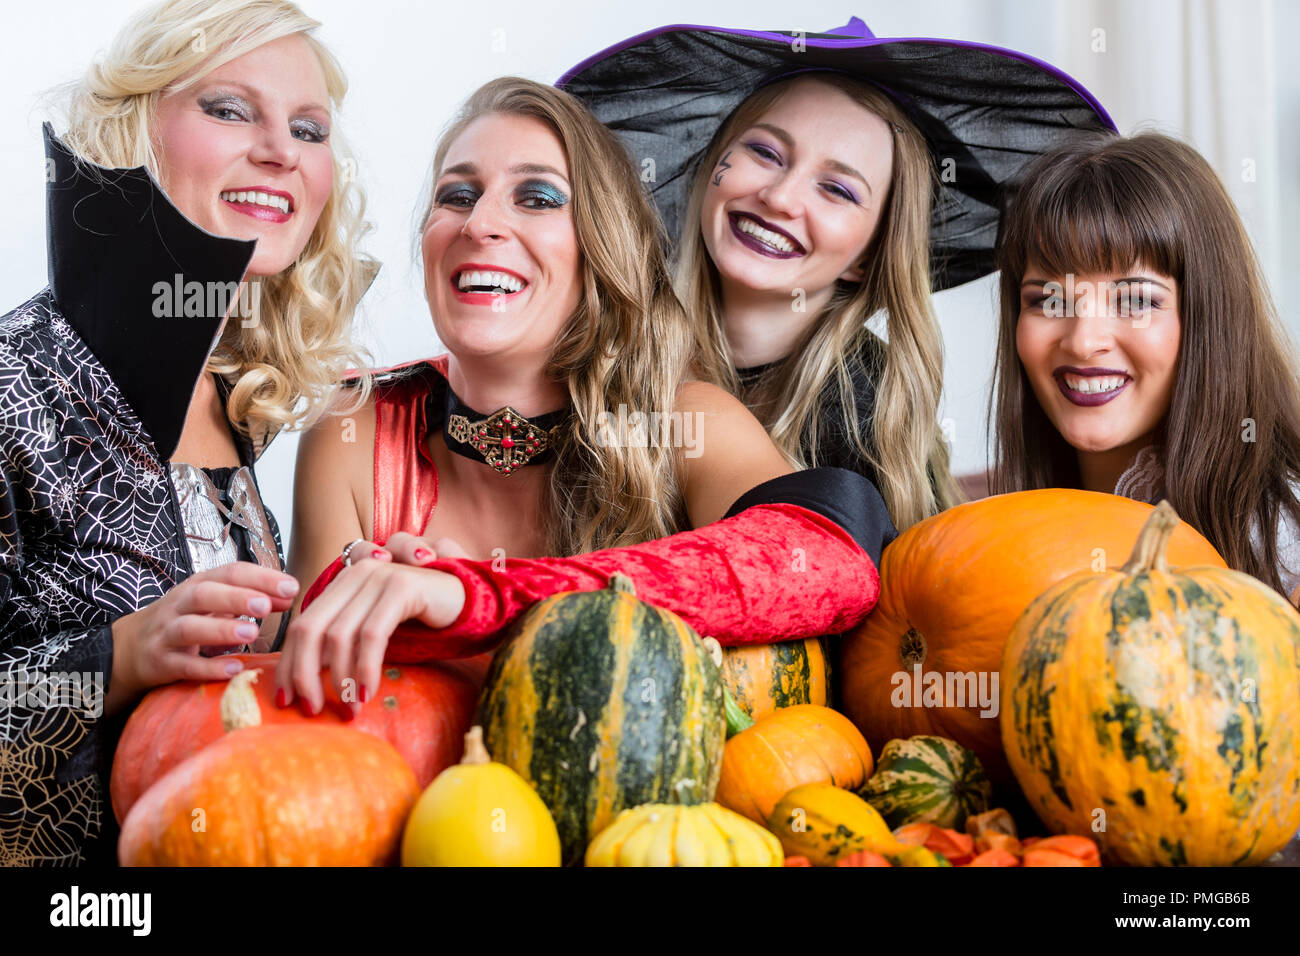 Four cheerful women celebrating Halloween together Stock Photo